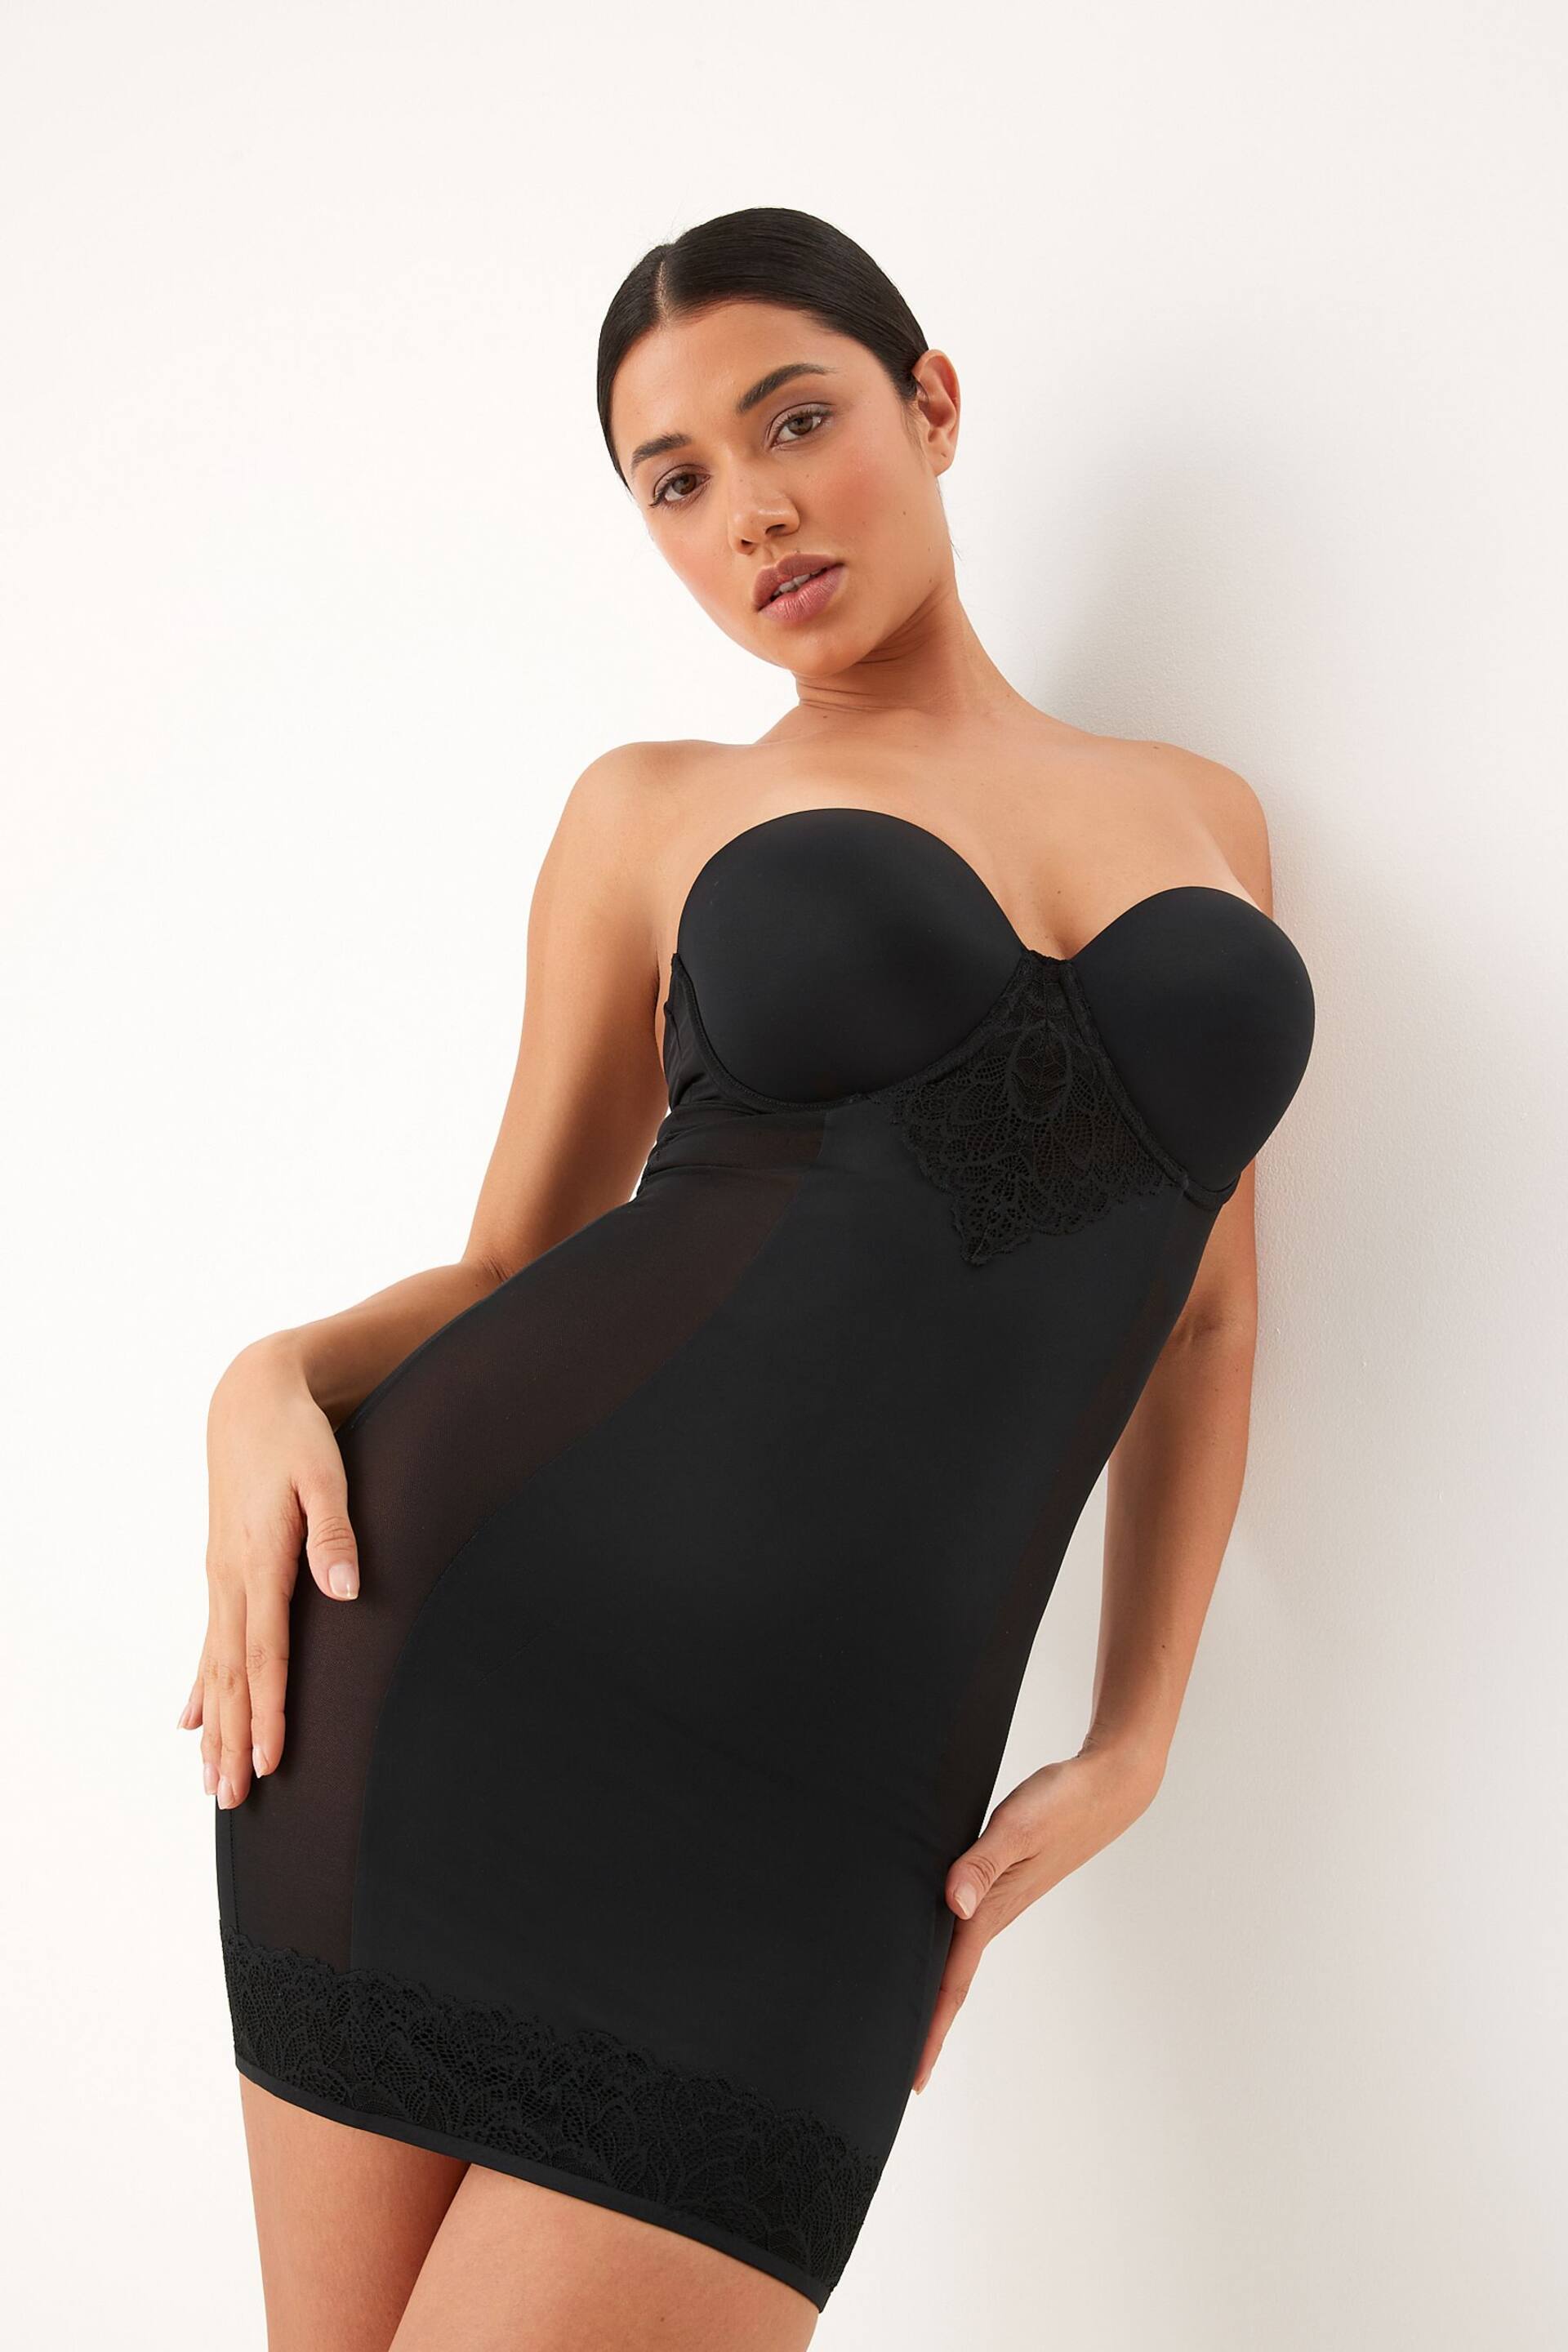 Black DD+ Firm Tummy Control Lightly Padded Lace Slip - Image 7 of 8